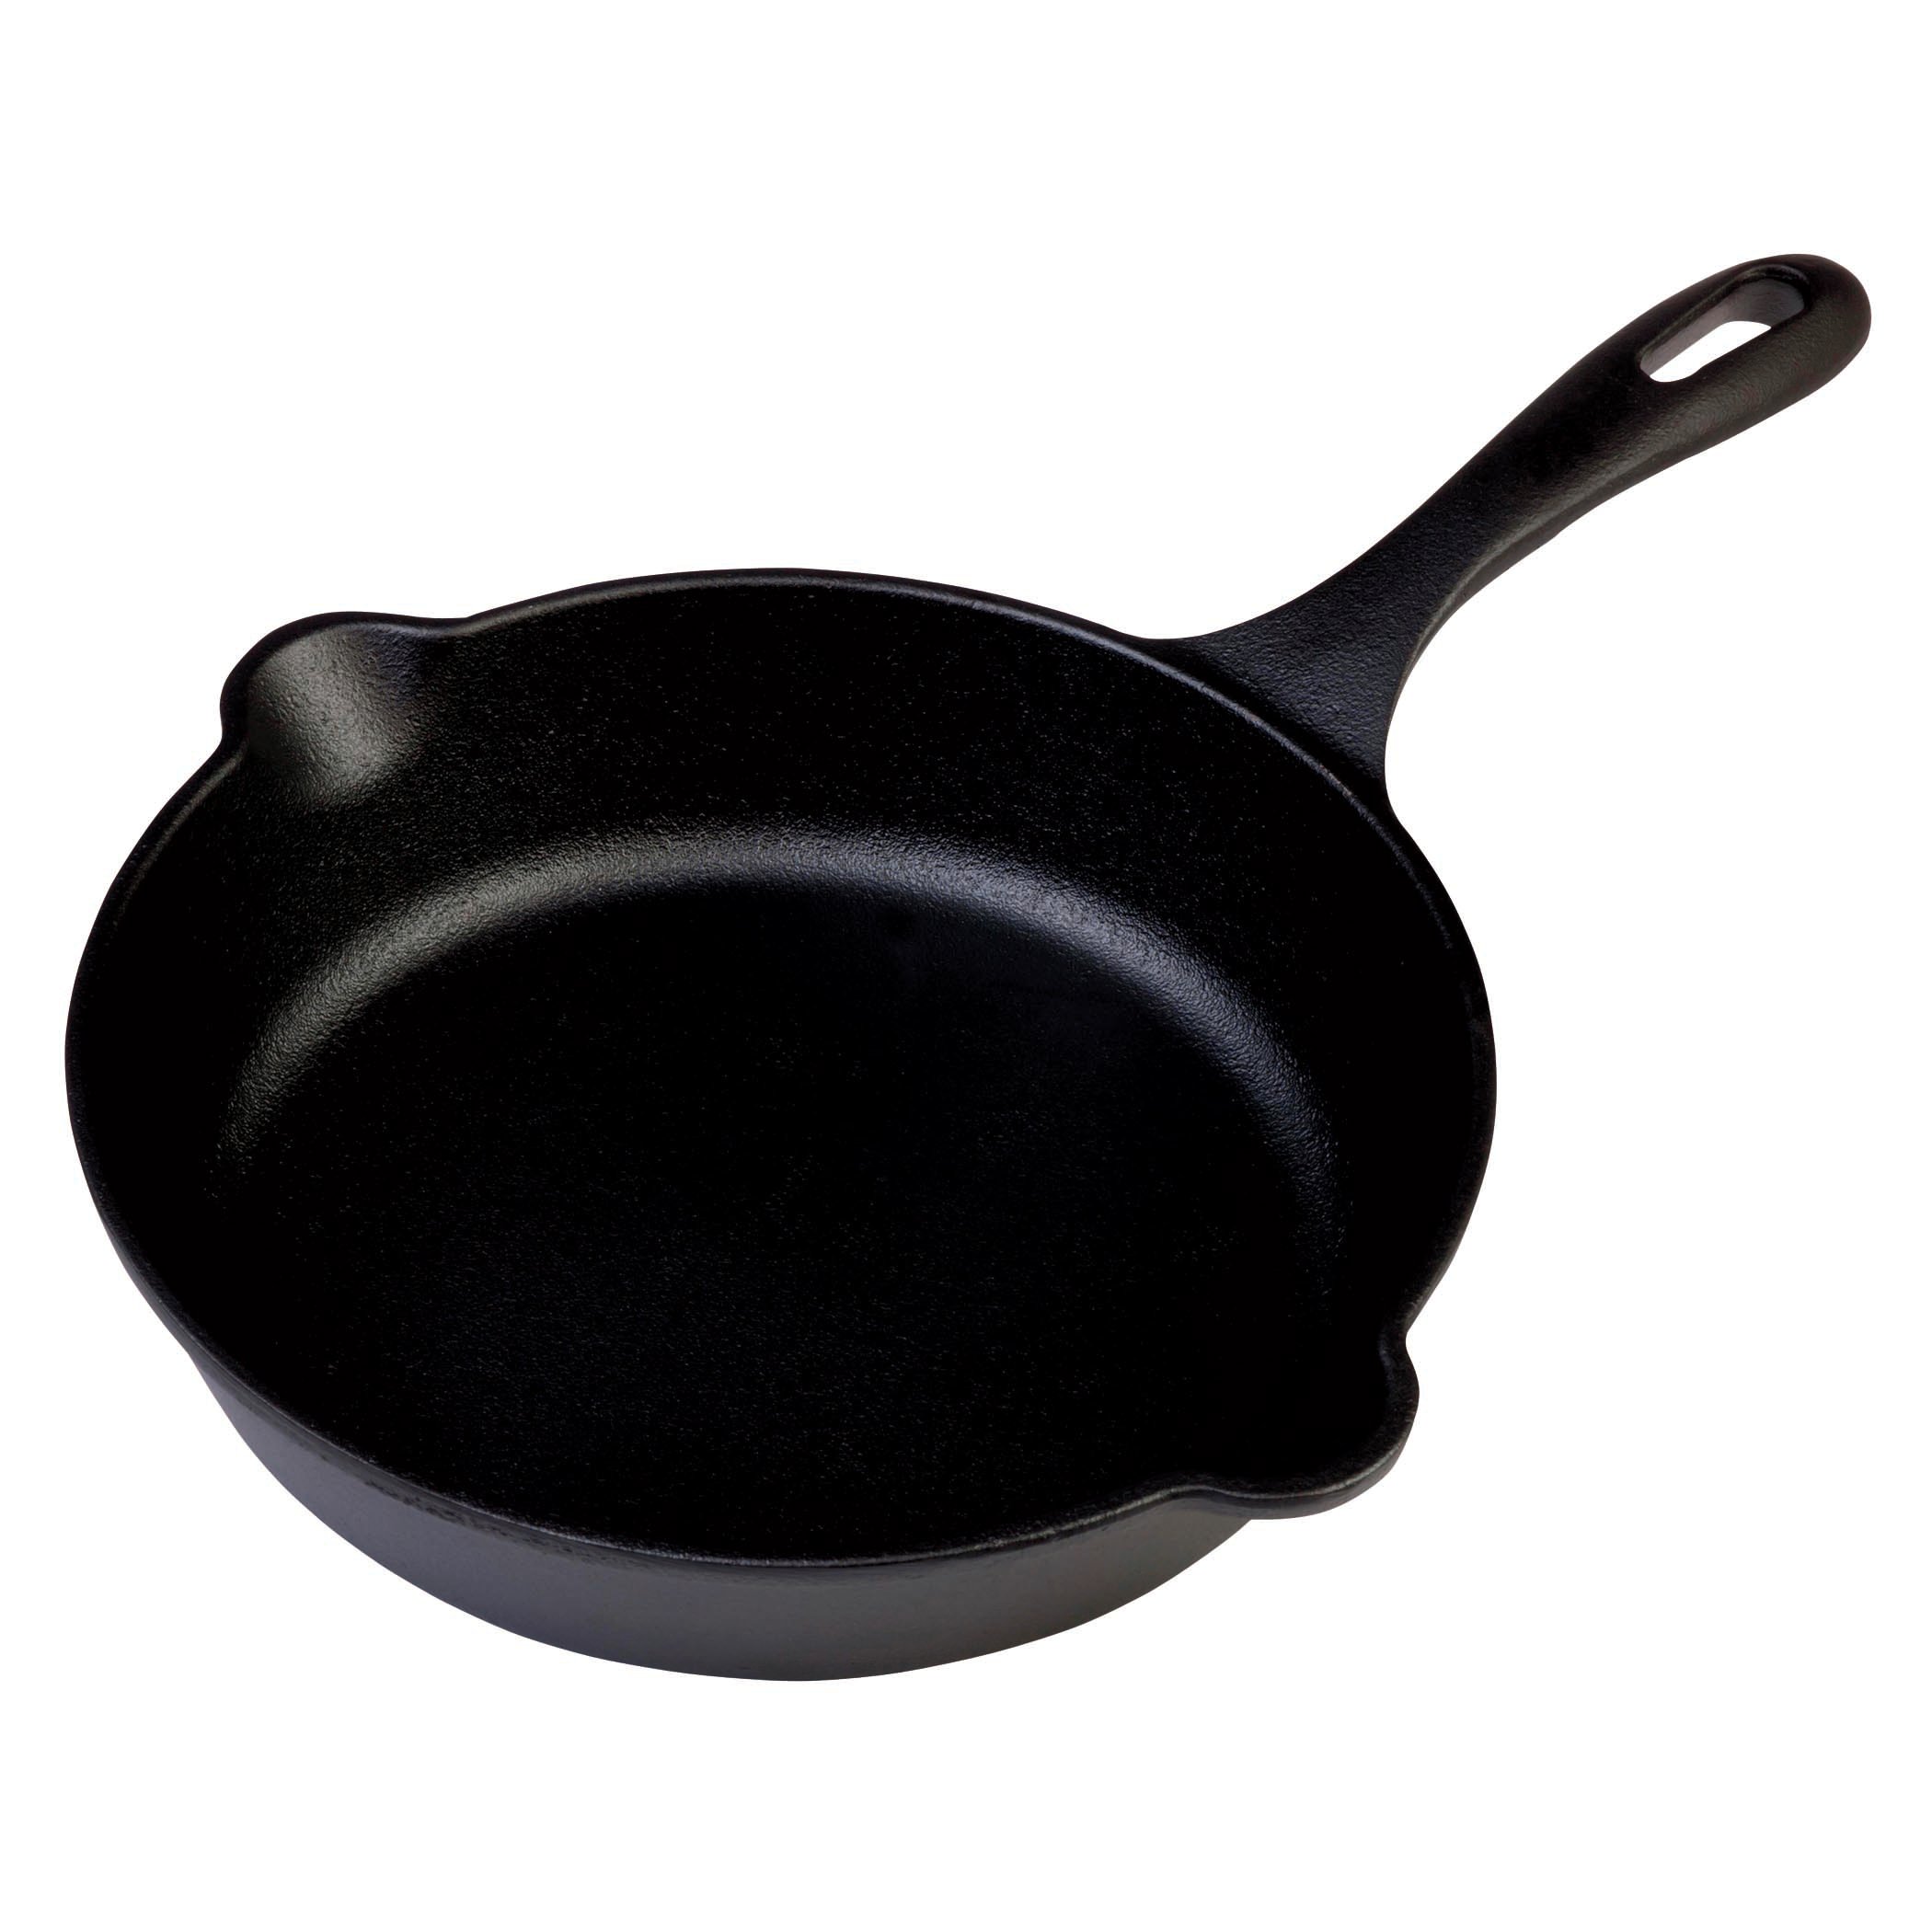 Restaurantware Met Lux 7.75 inch Cast Iron Skillet, 1 Pre-Seasoned Cast Iron Fry Pan - with Handle, with Pour Spouts, Black Cast Iron Cooking Pan